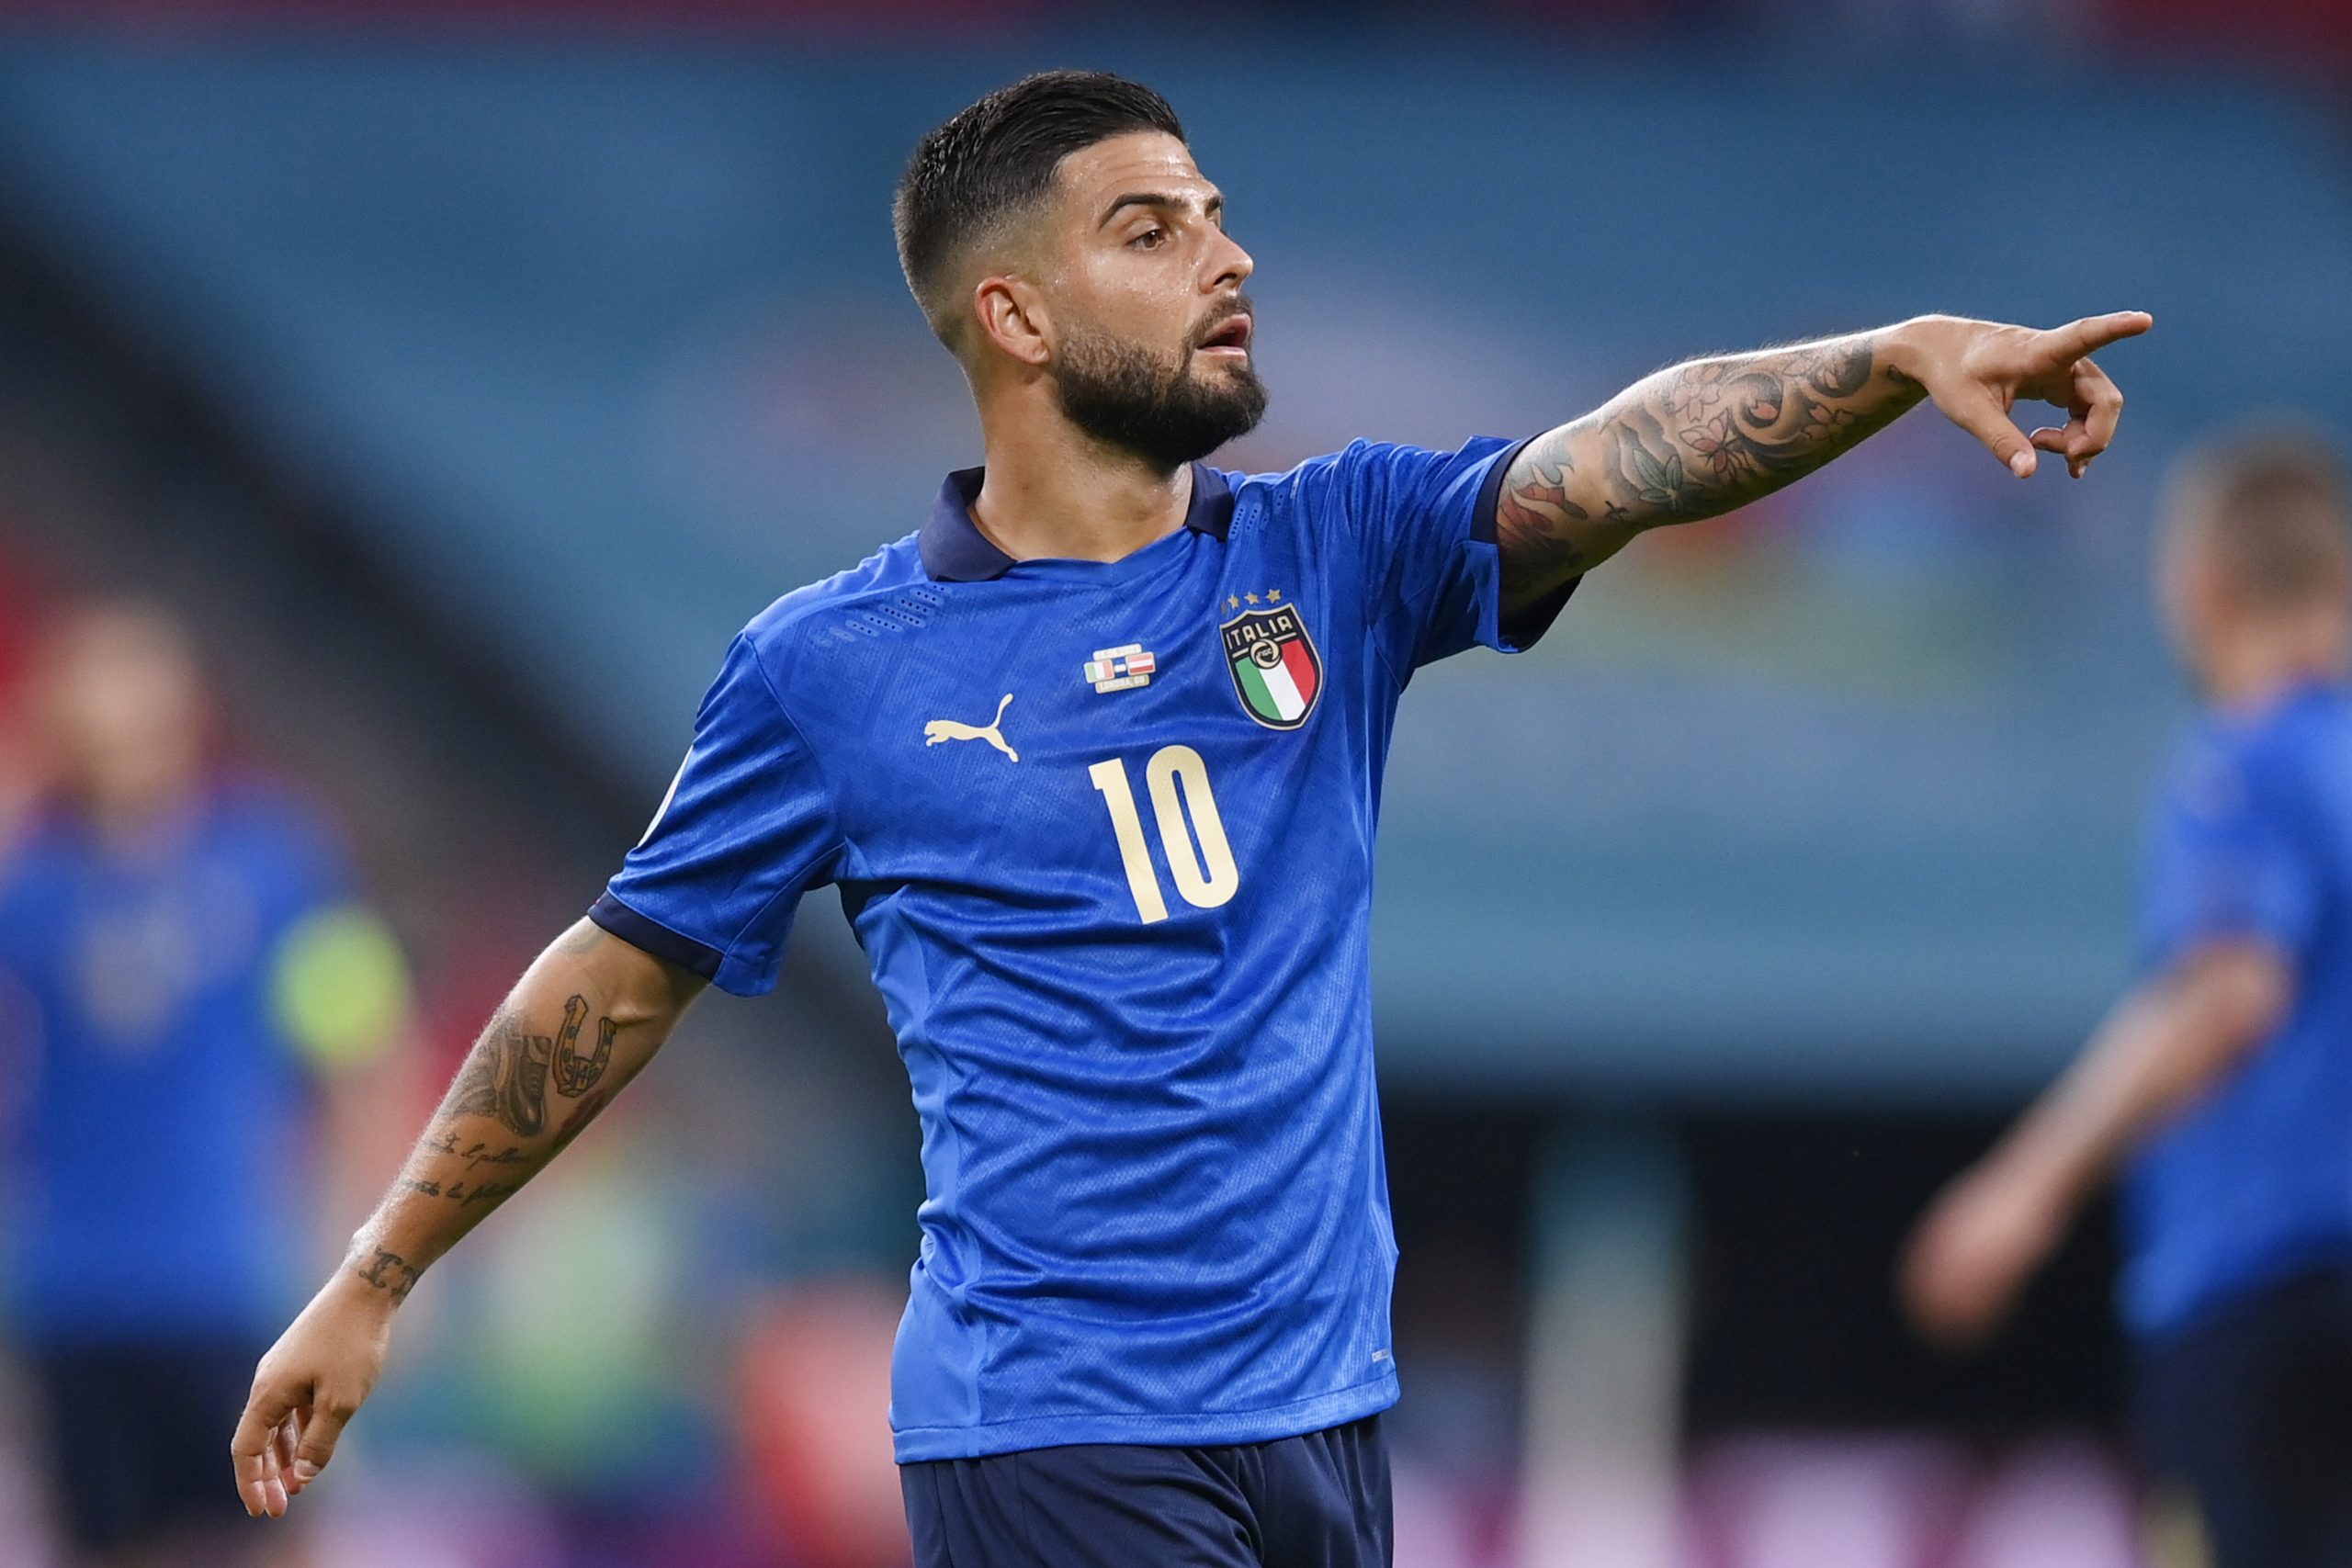 Lorenzo Insigne makes up part of our same game parlay for Italy against Belgium at Euro 2020